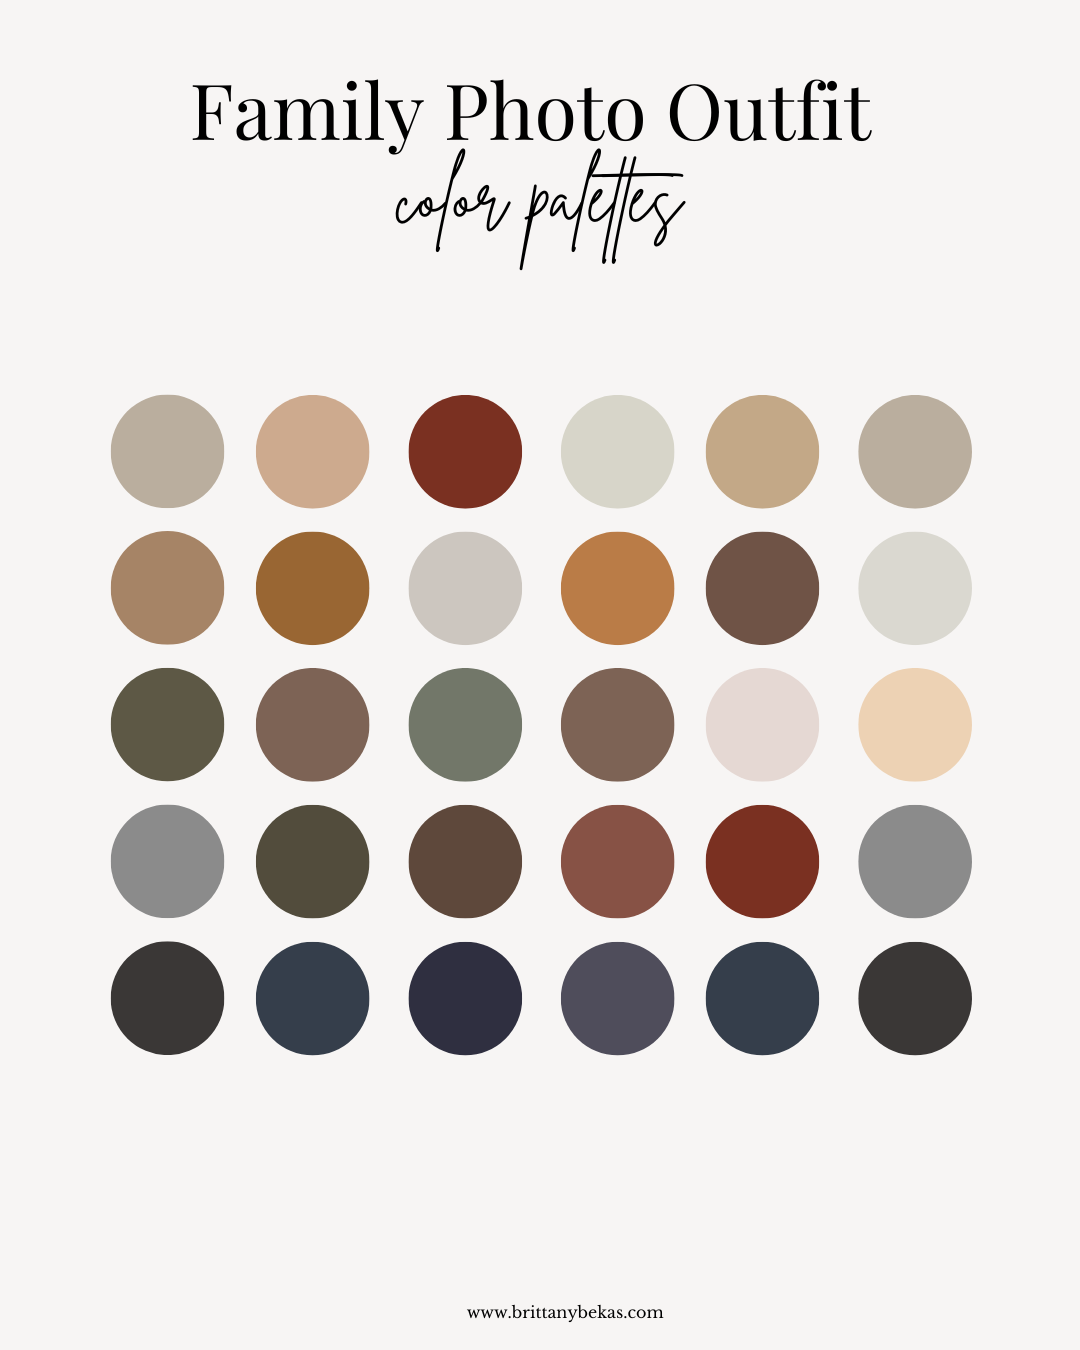 Family Photo Outfit Ideas - Fall Family Outfit Color Palette